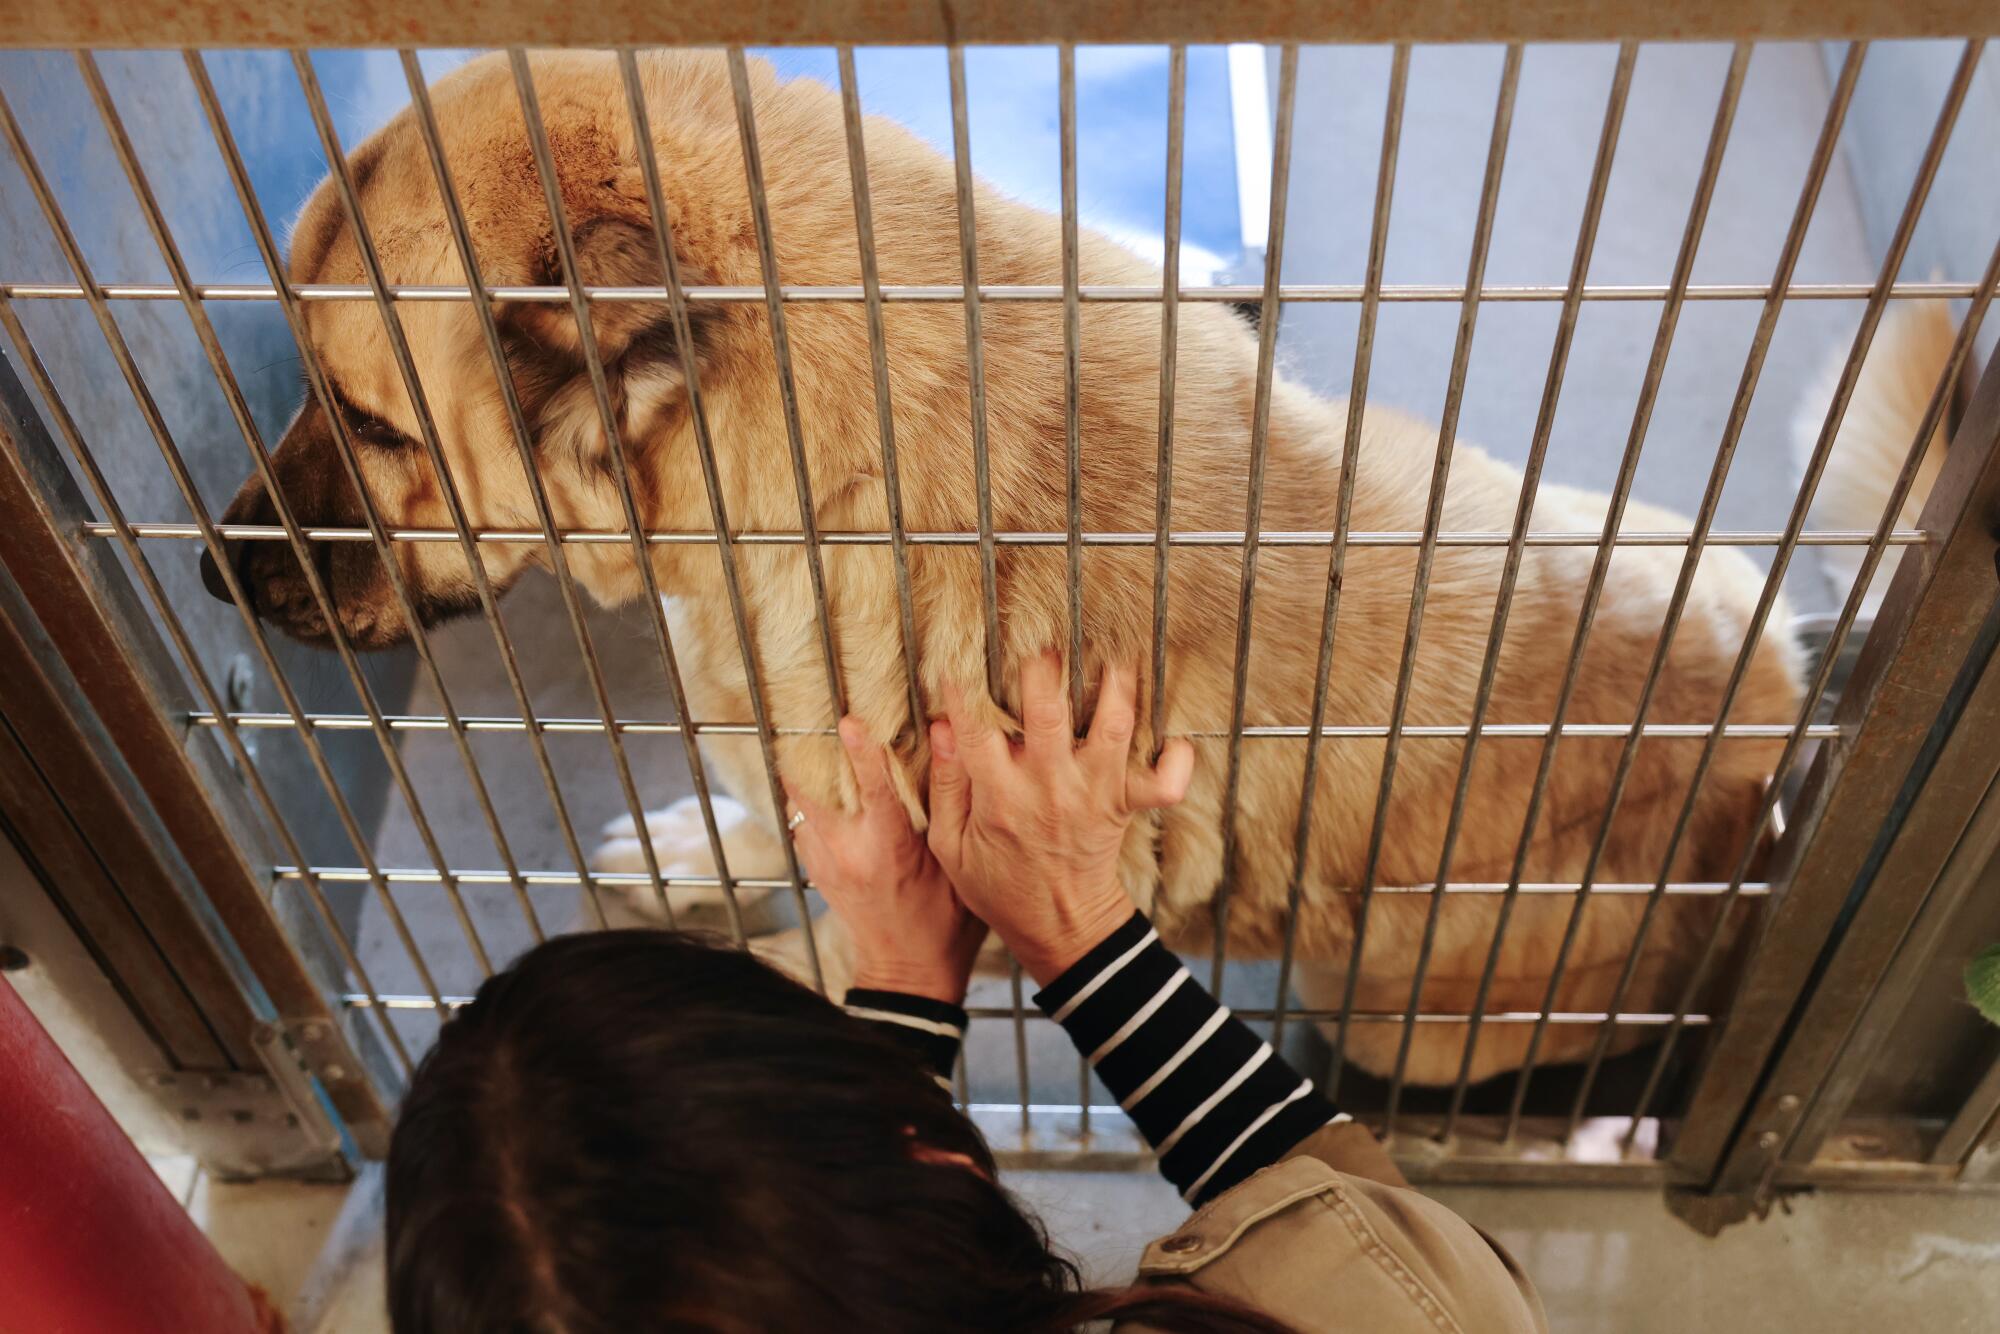 Rita Earl Blackwell reaches her fingers through bars of an enclosure to give Tina, a tan fluffy dog, some scratches.